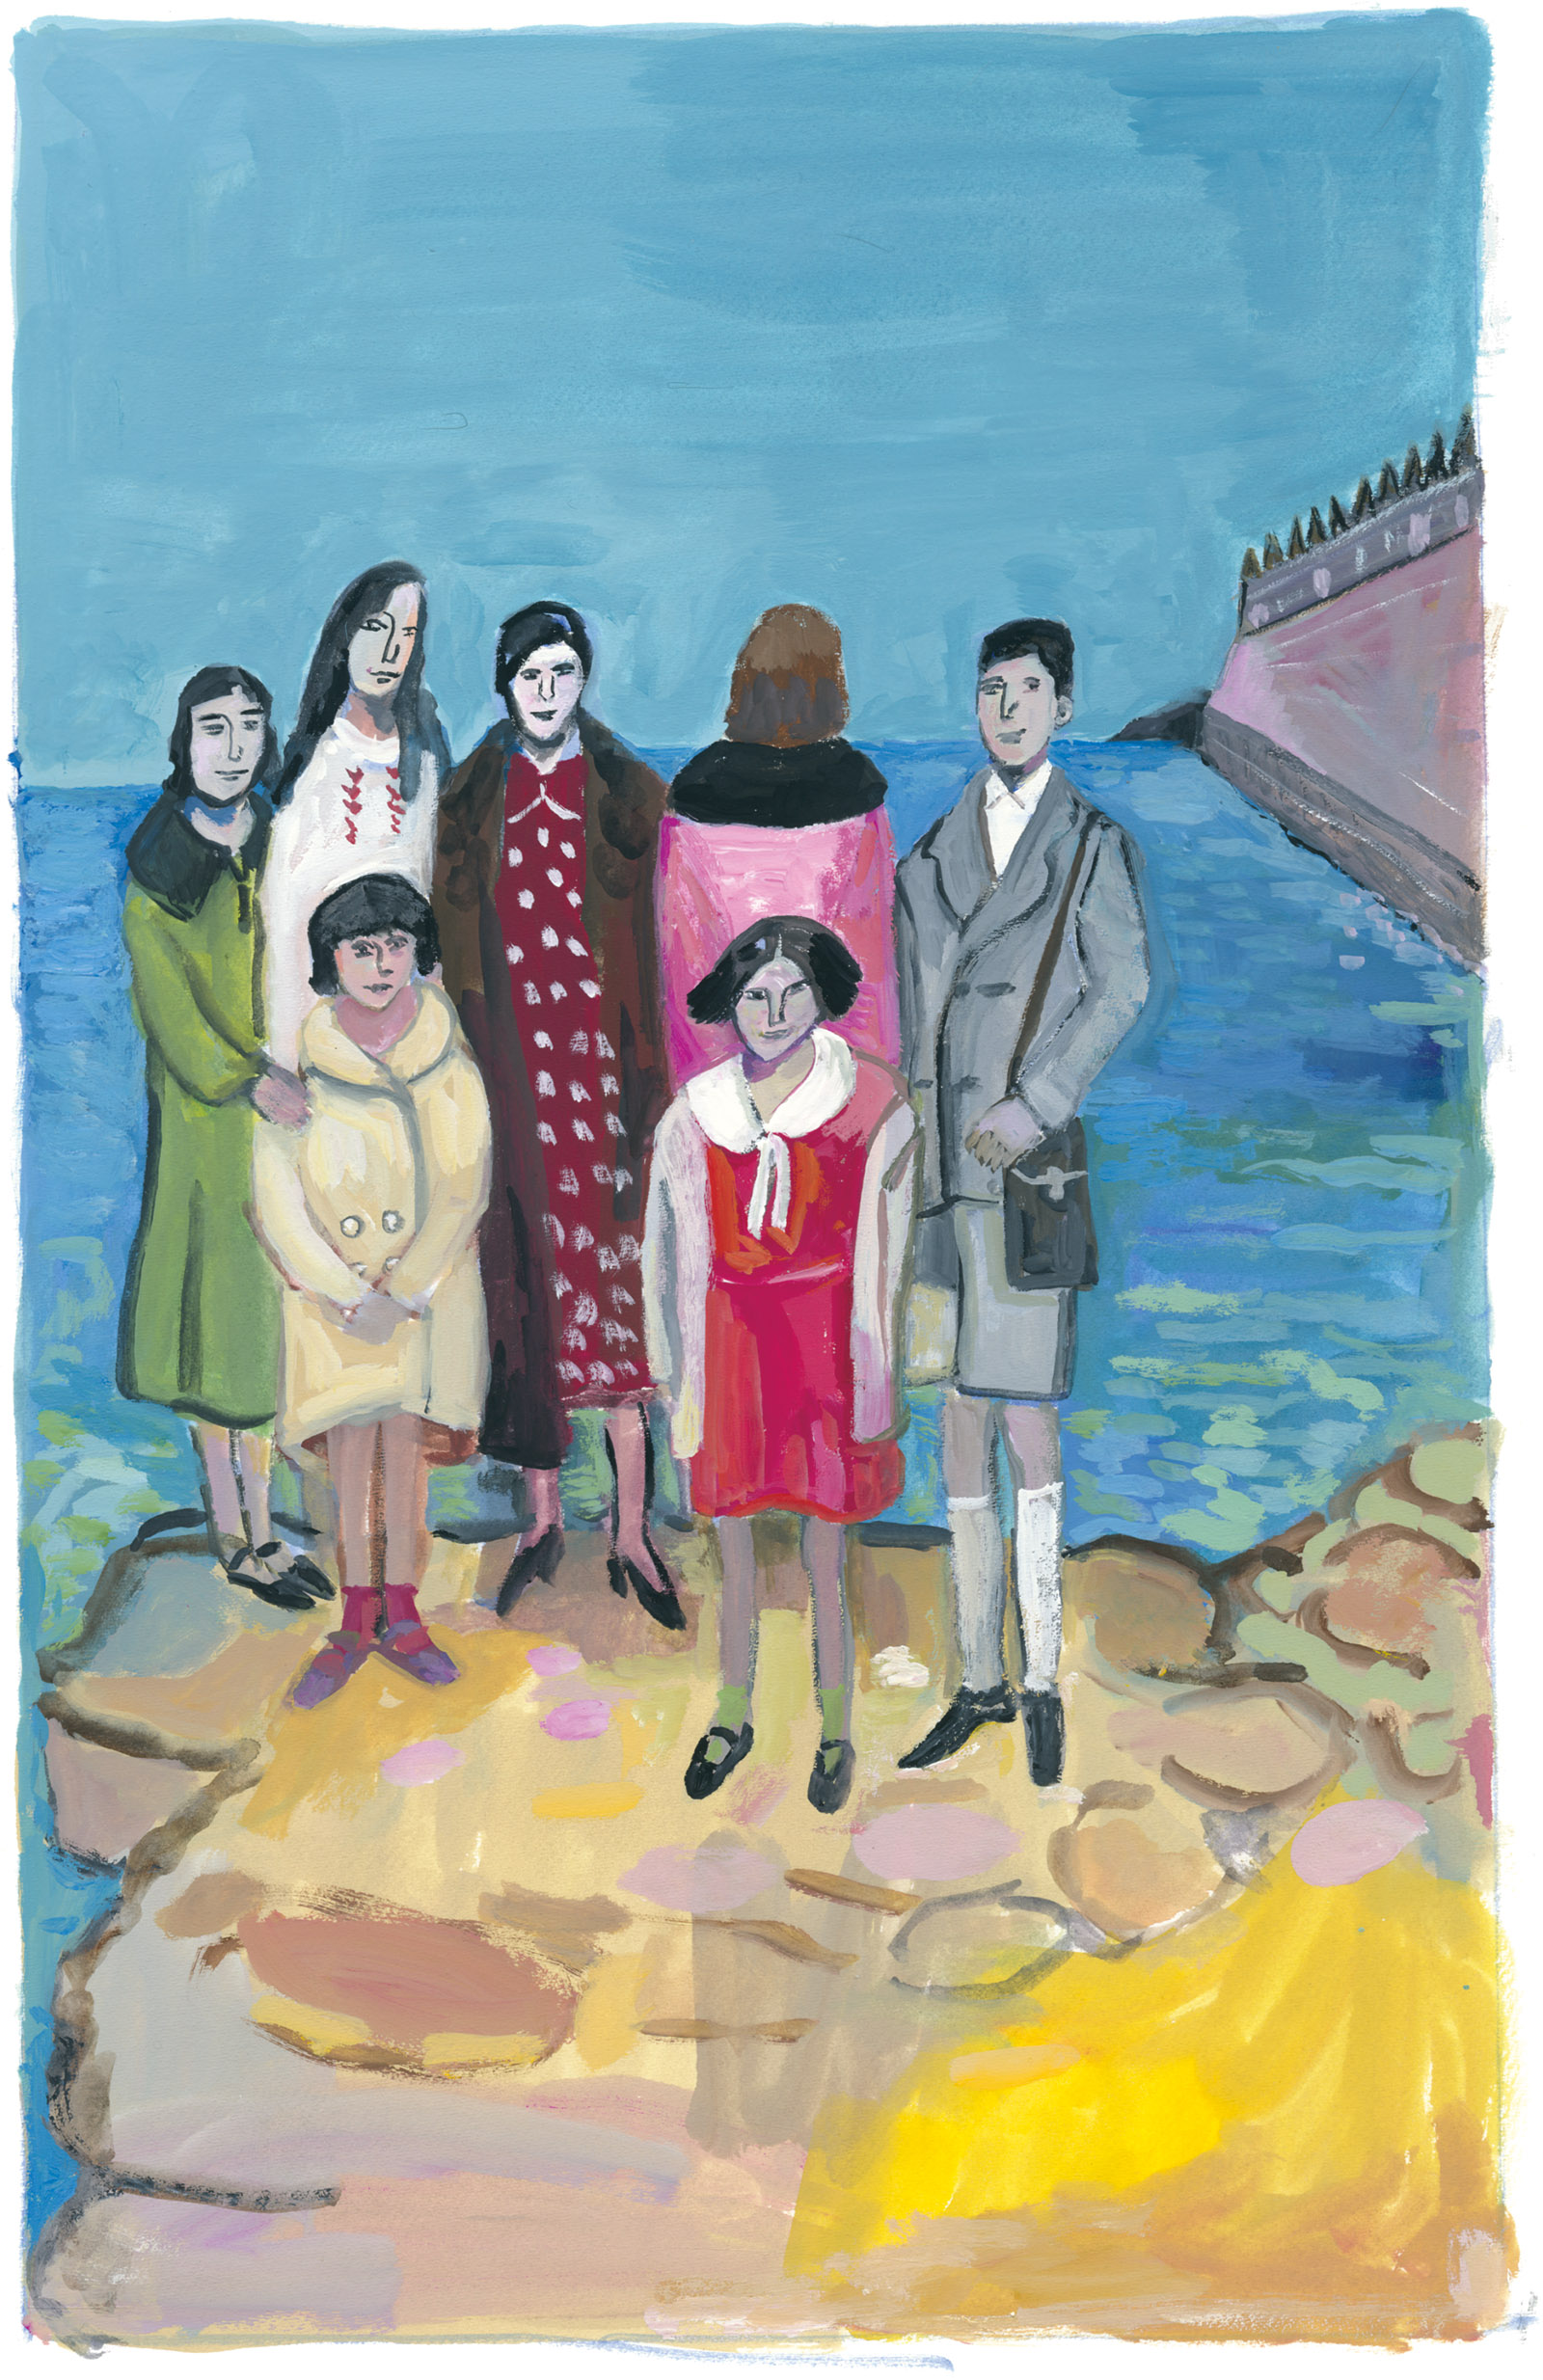 Stella Levi with members of her family and friends outside the Juderia, Rhodes; illustration by Maira Kalman